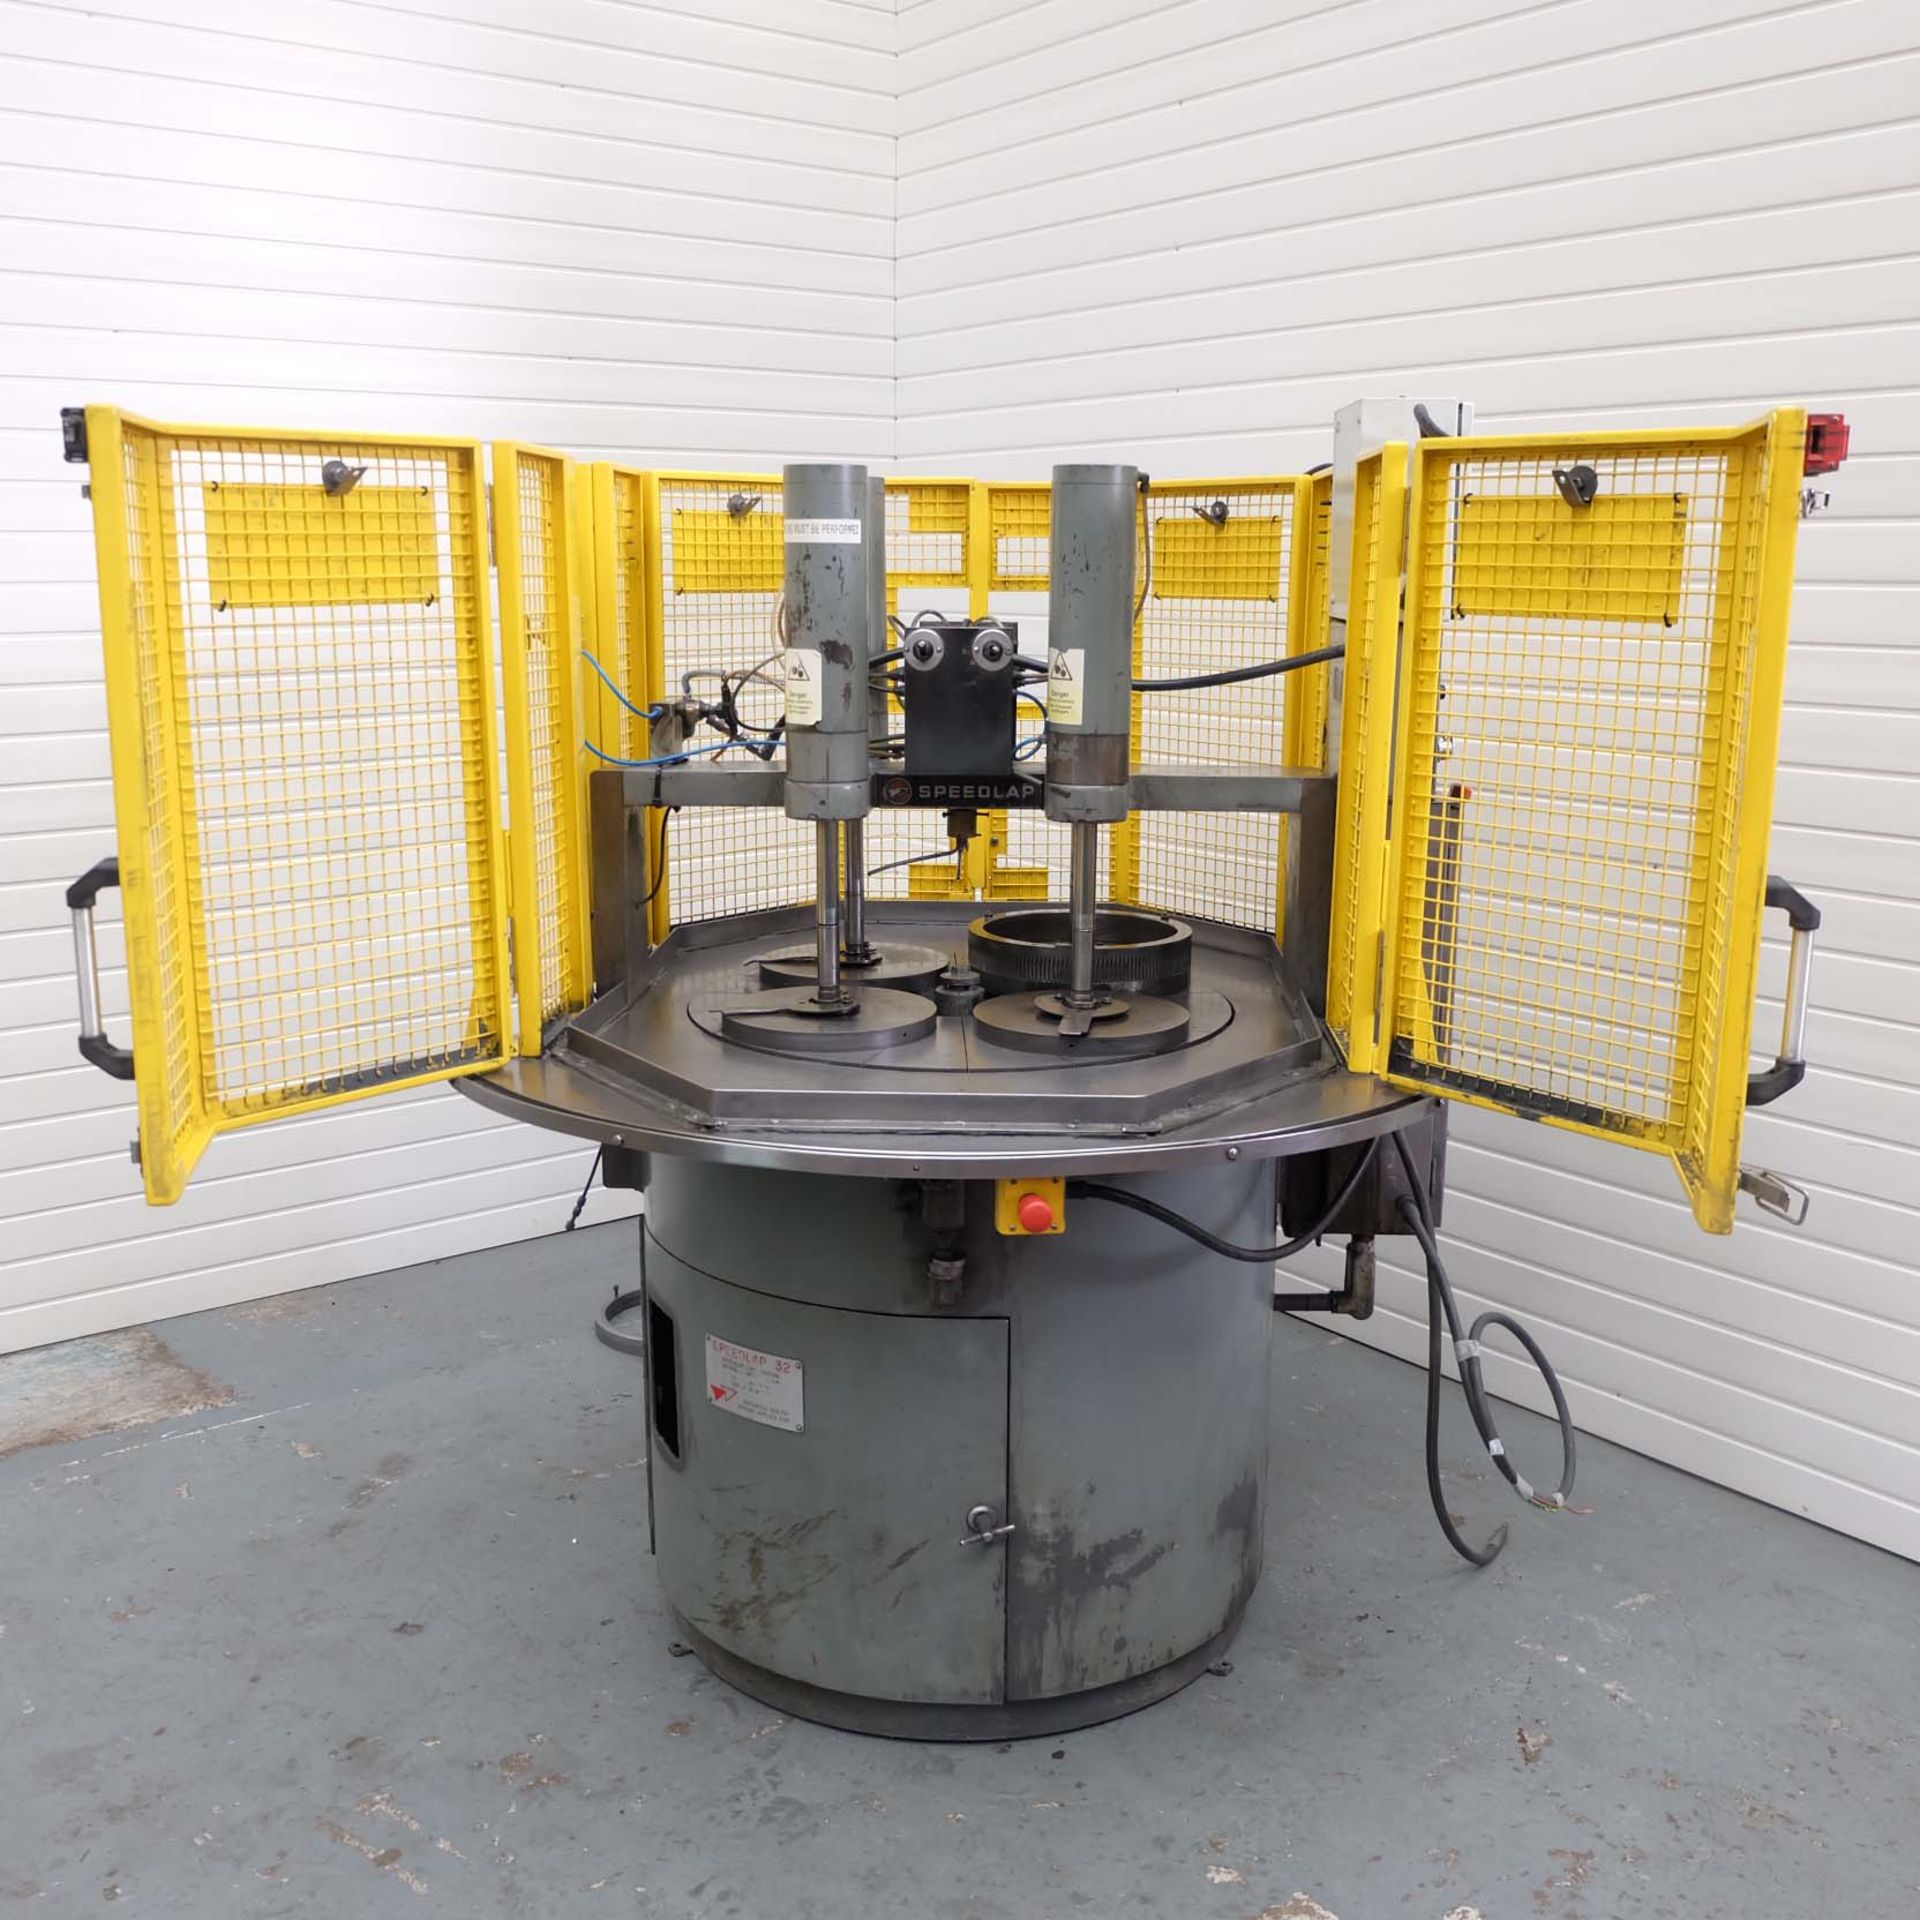 Speedfam Model Speedlap 32 Rotary Table Lapping Machine With Four Pneumatic Power Hold Downs.